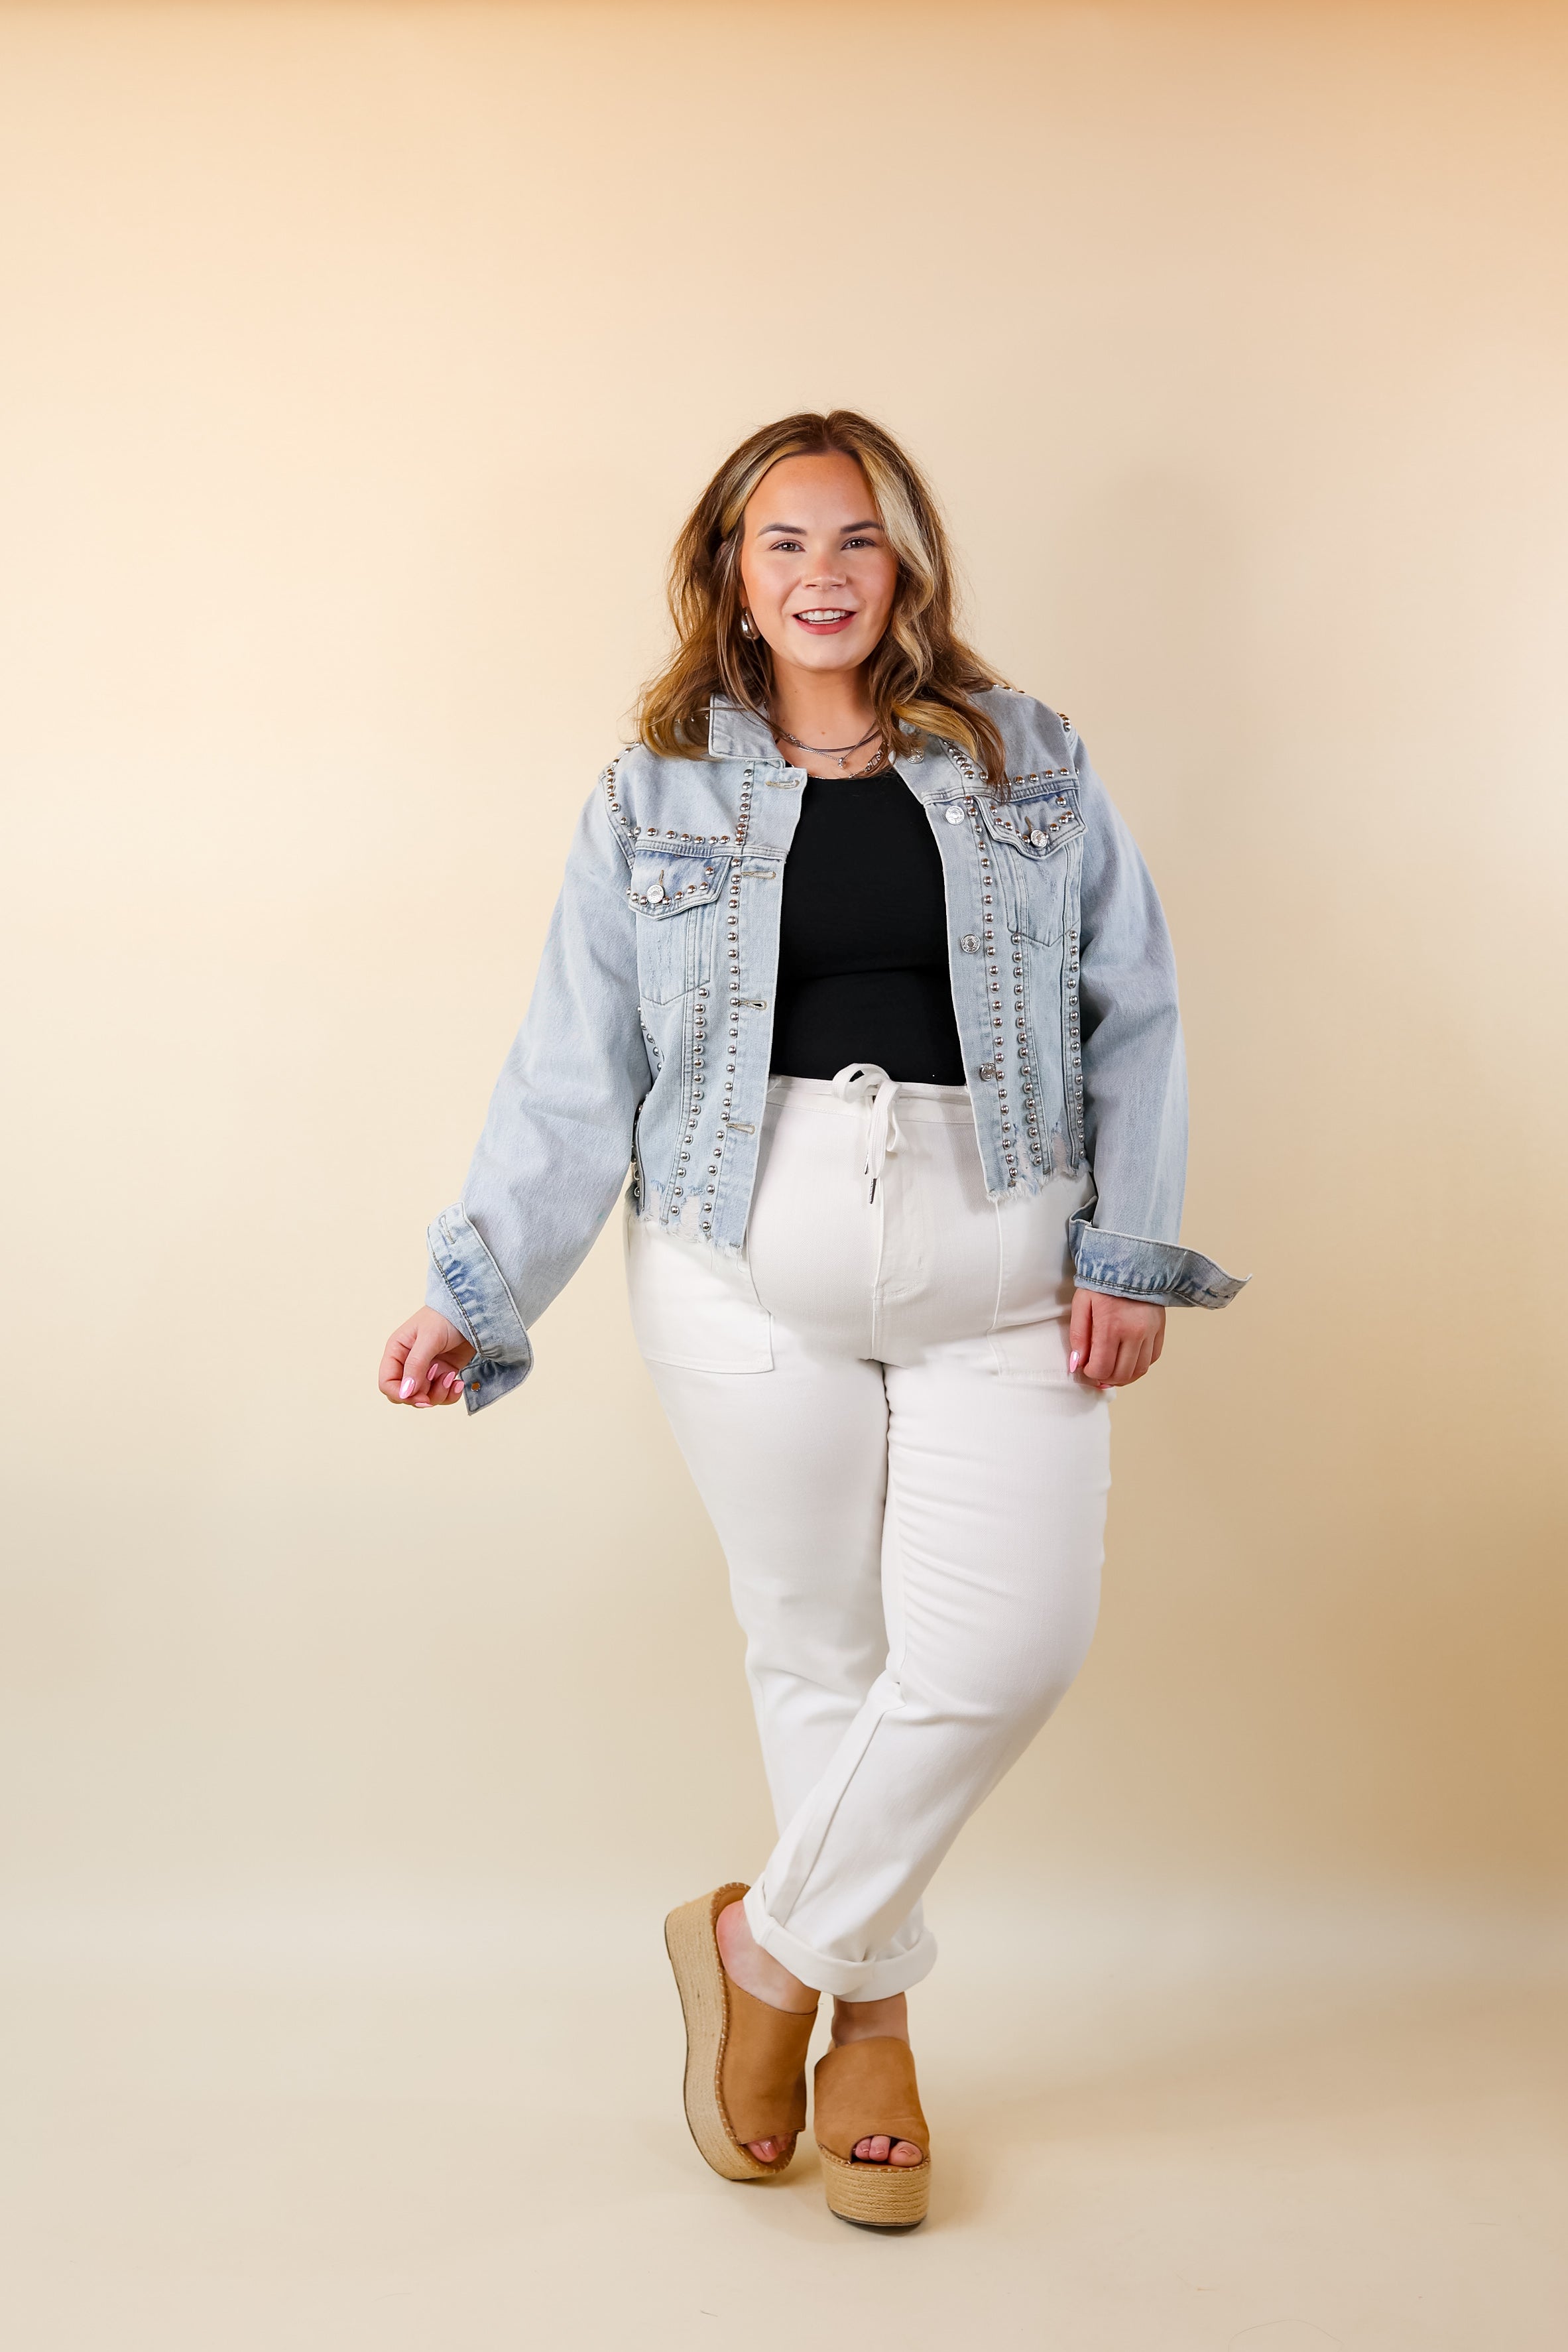 Instantly Impressed Cropped Denim Jacket with Silver Studs in Light Wash - Giddy Up Glamour Boutique